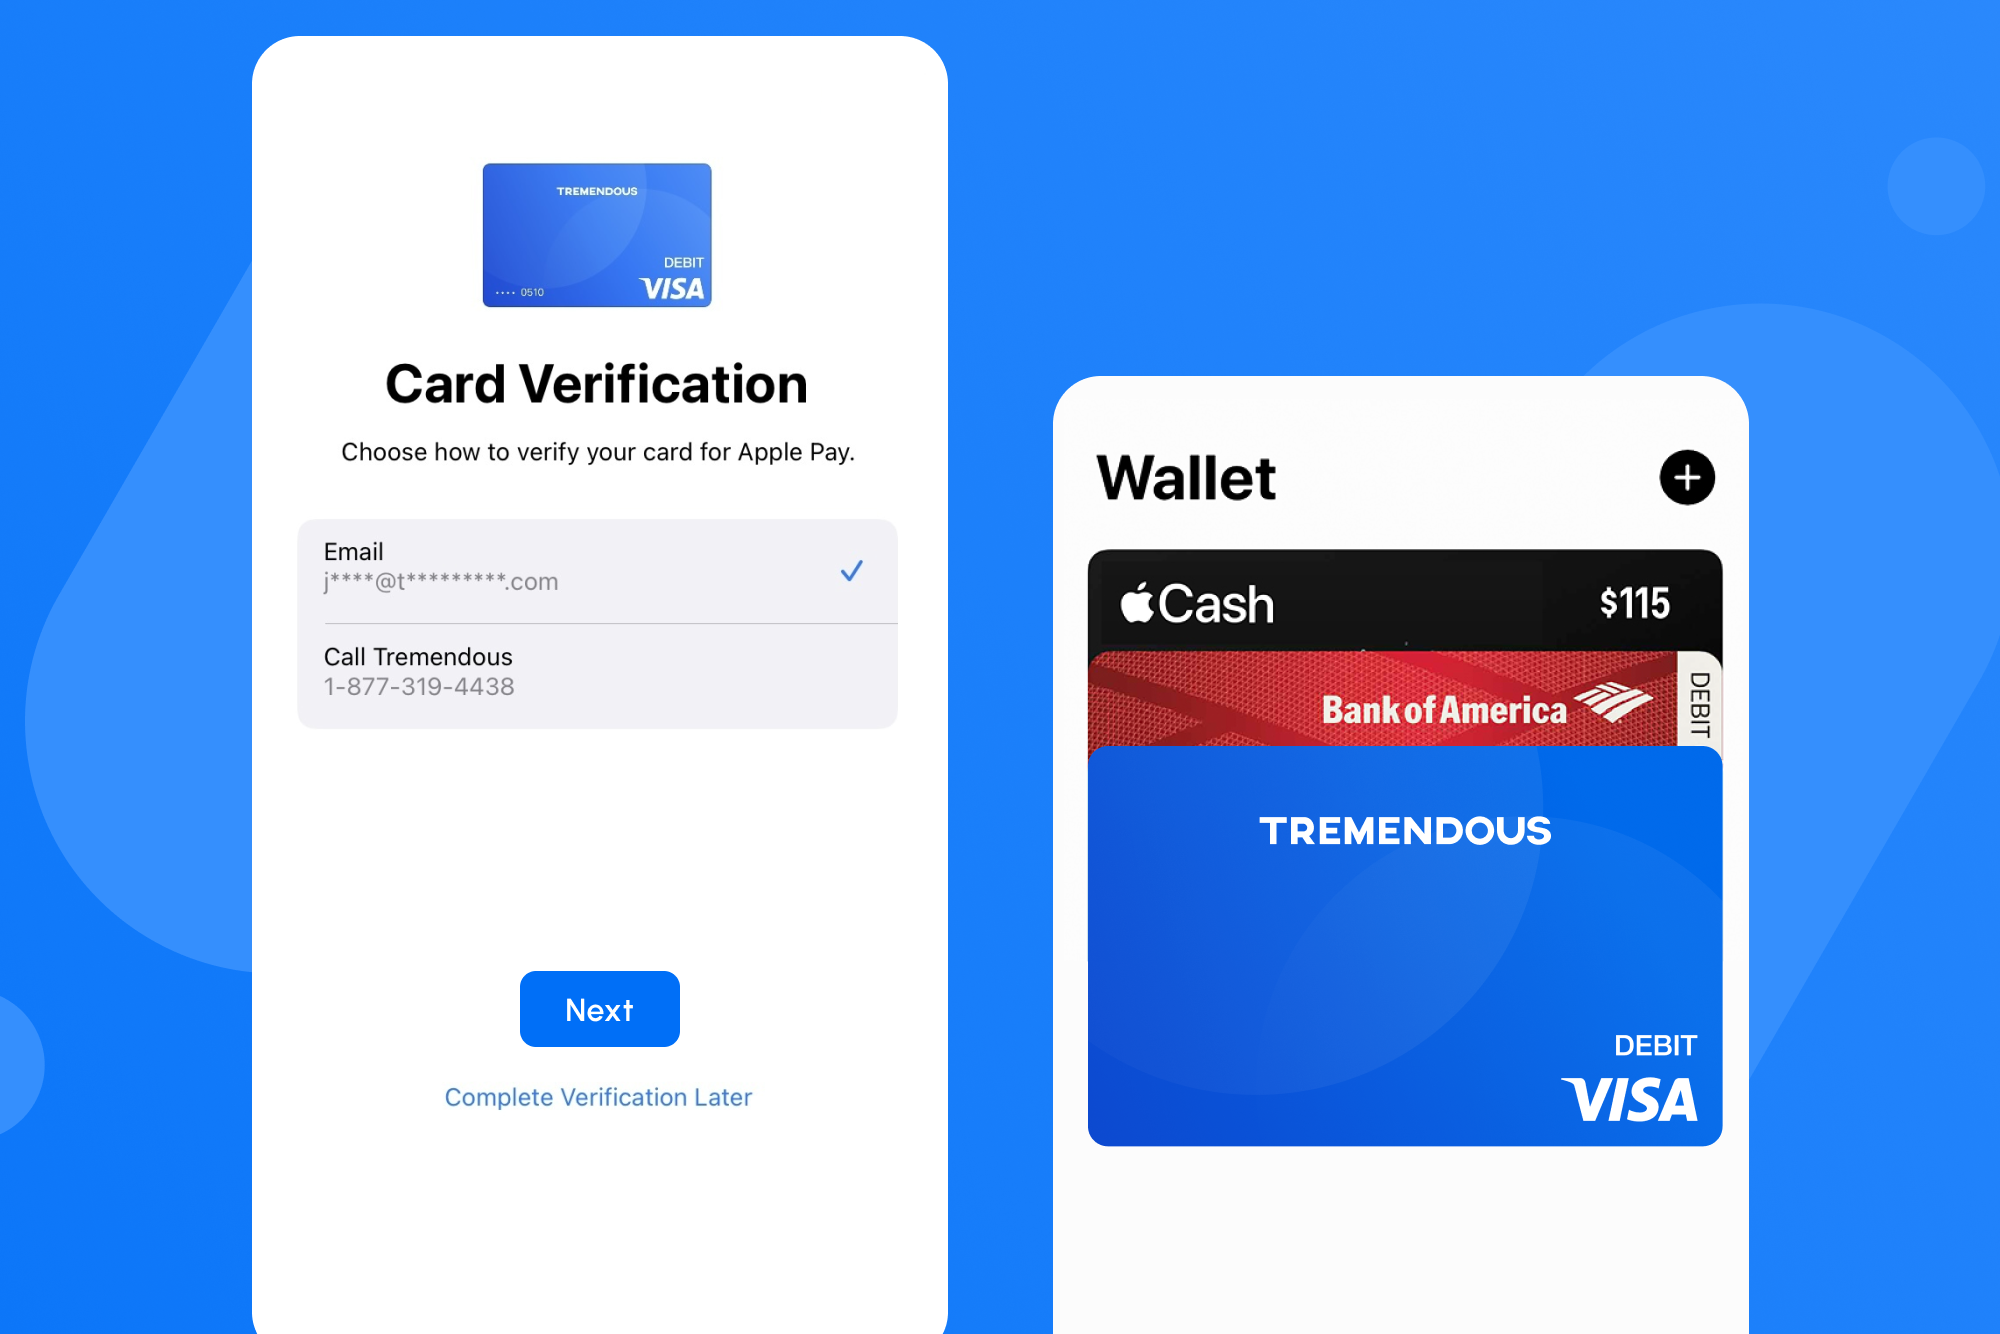 An image showing a Tremendous Visa prepaid card being added to an Apple Wallet and Google Pay.